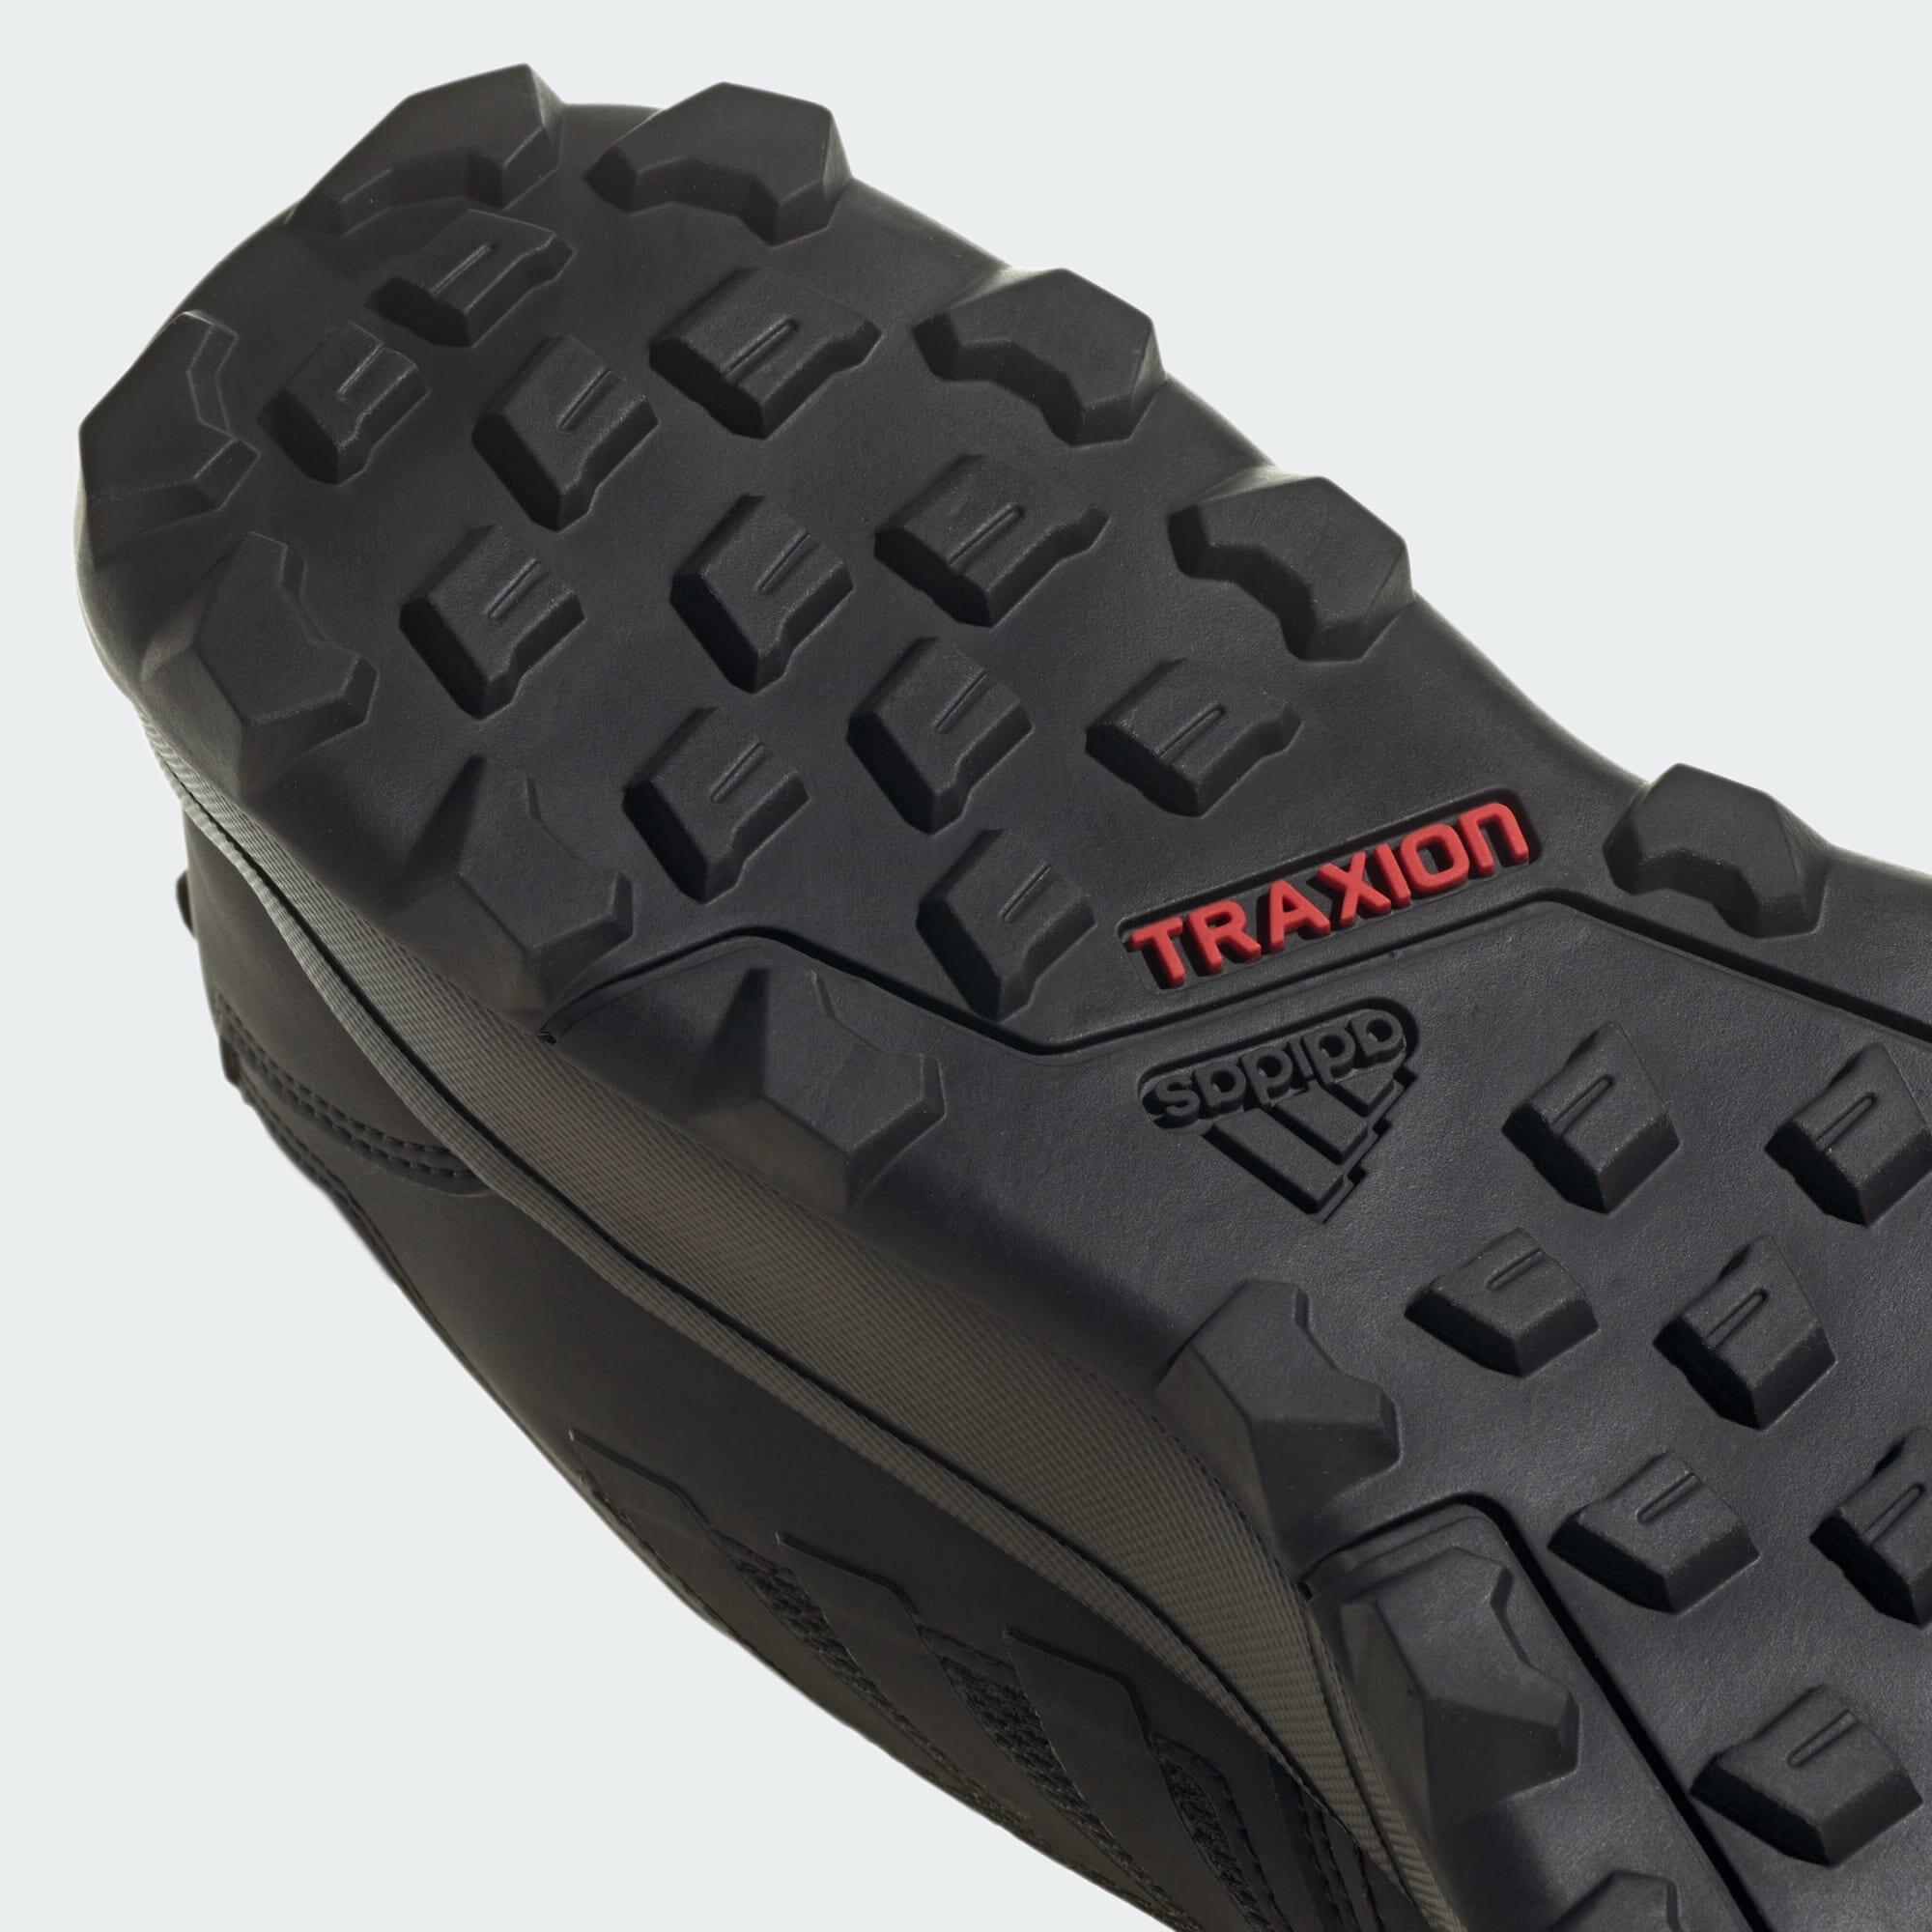 Tracerocker 2.0 GORE-TEX Trail Running Shoes 7/7